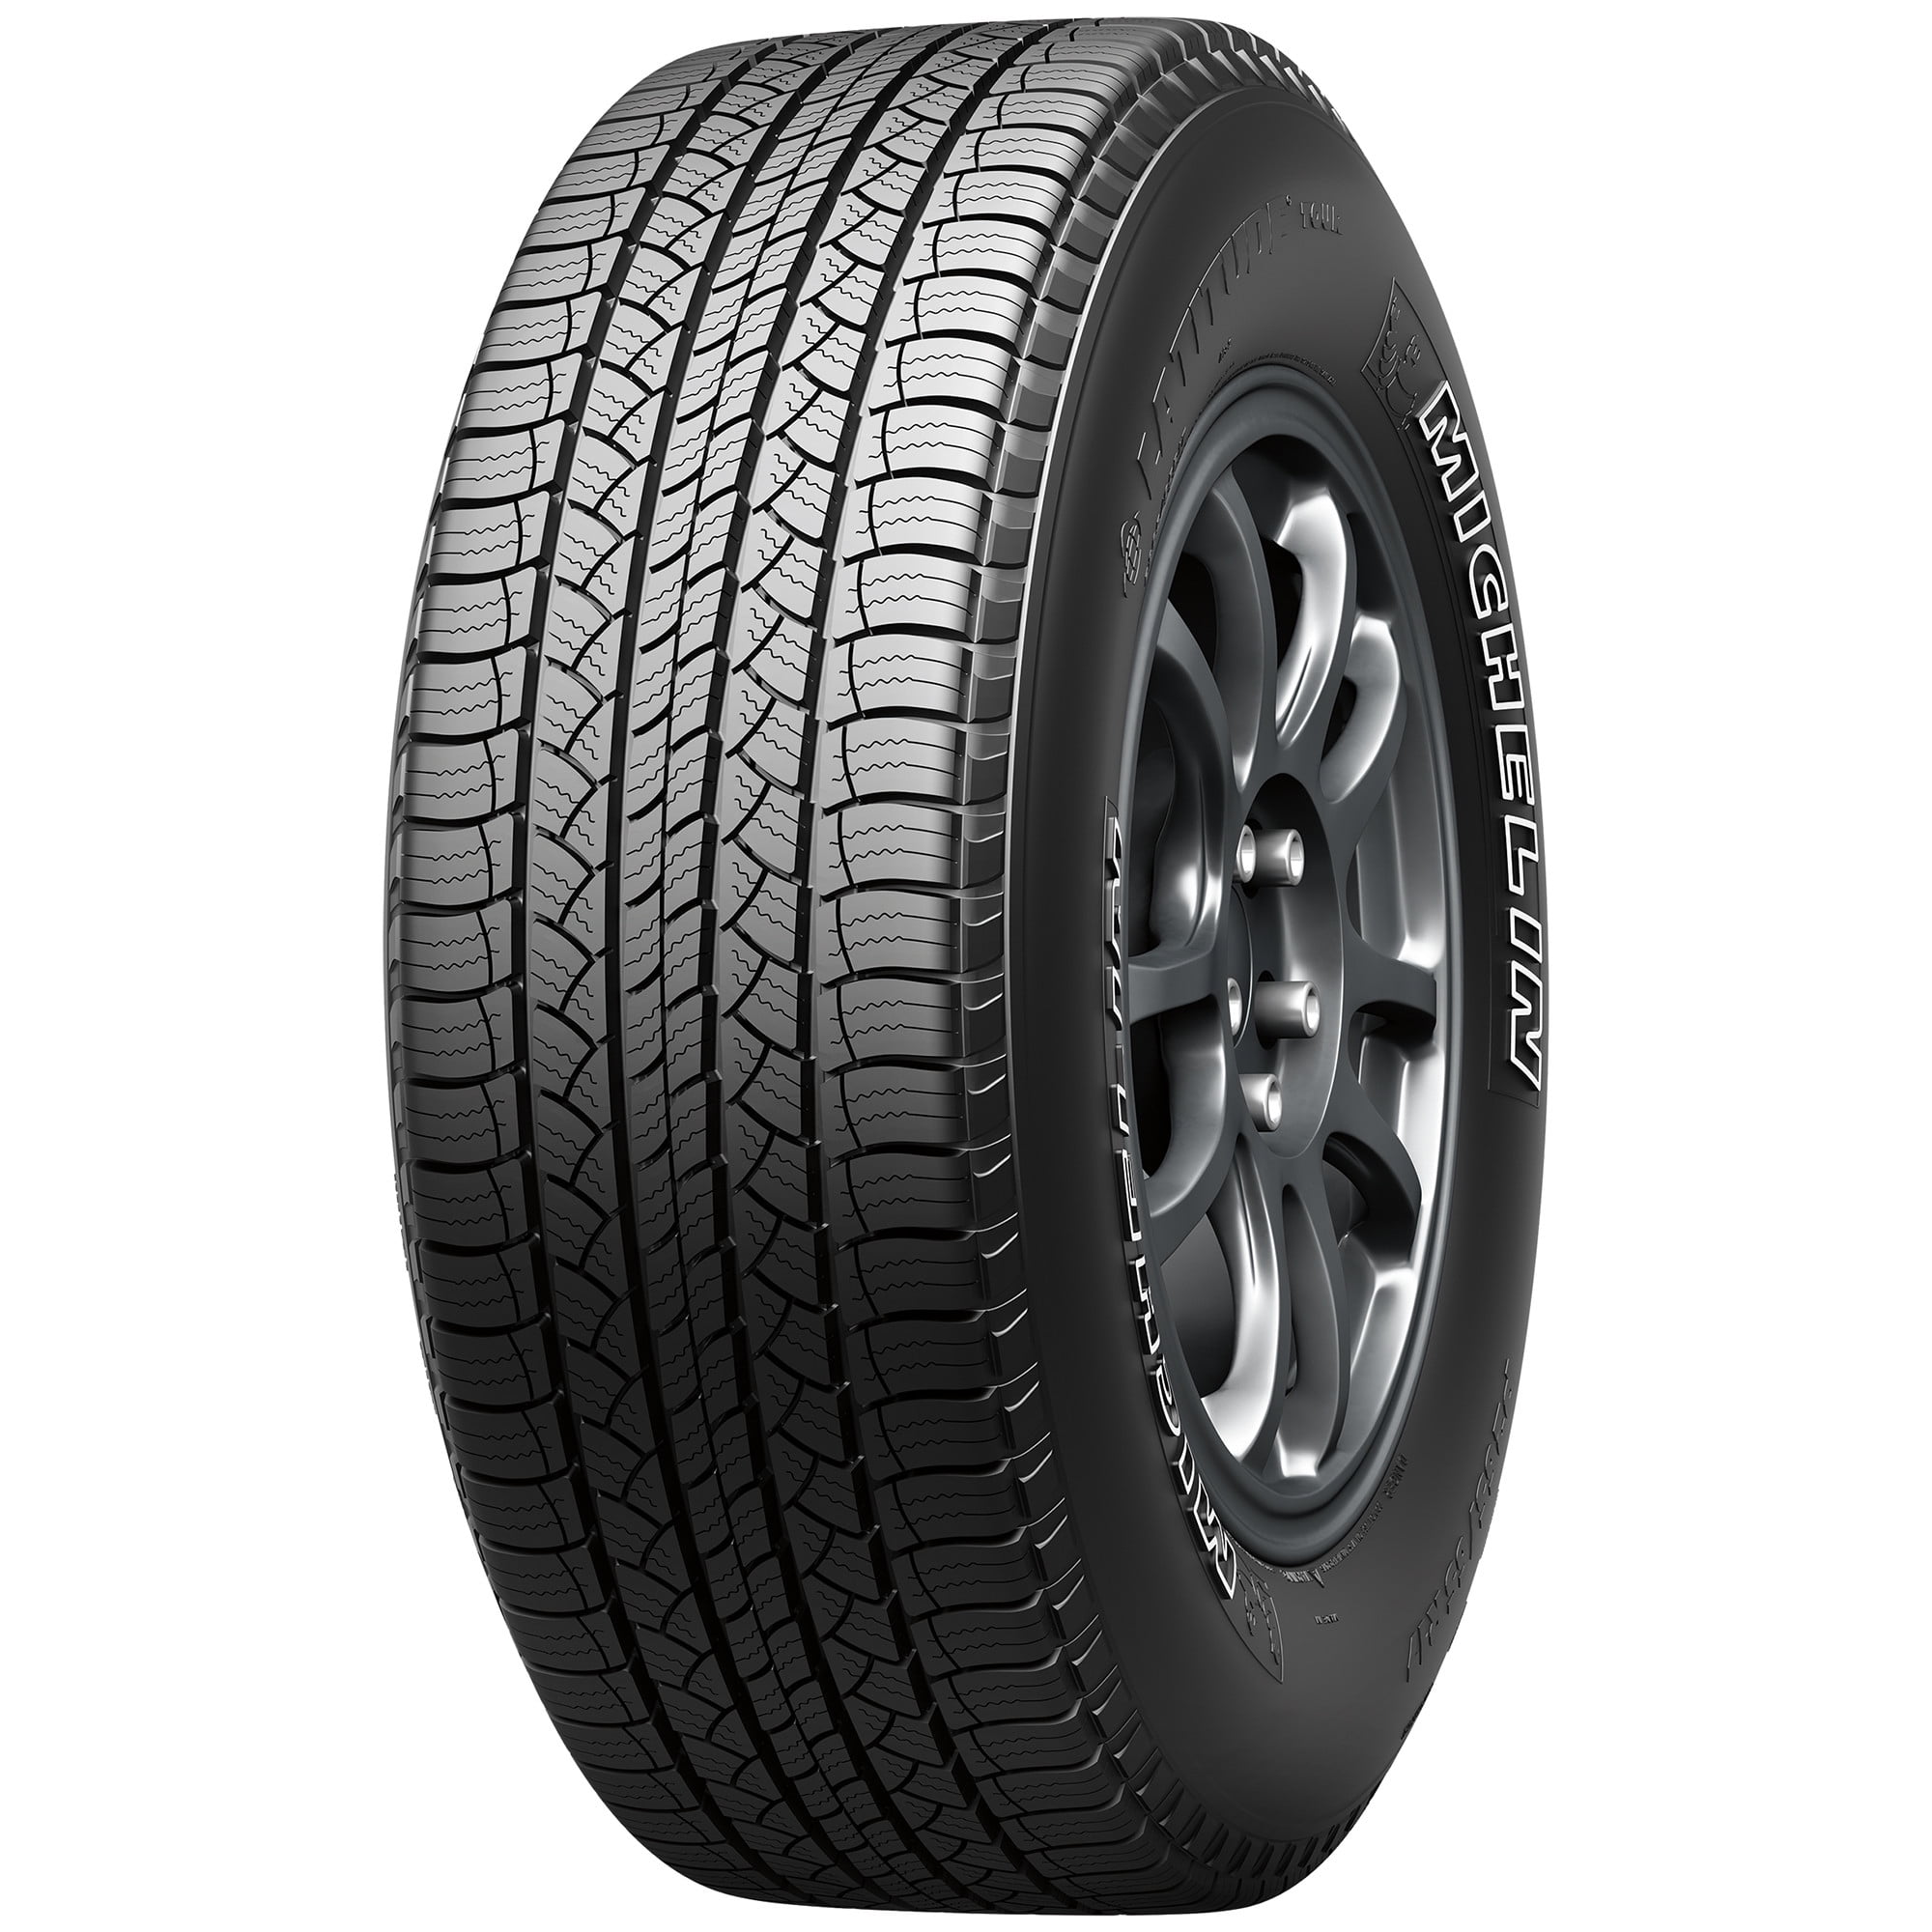 235/65R18/XL 110V MICHELIN Latitude Tour HP All Season Radial Car Tire for SUVs and Crossovers 